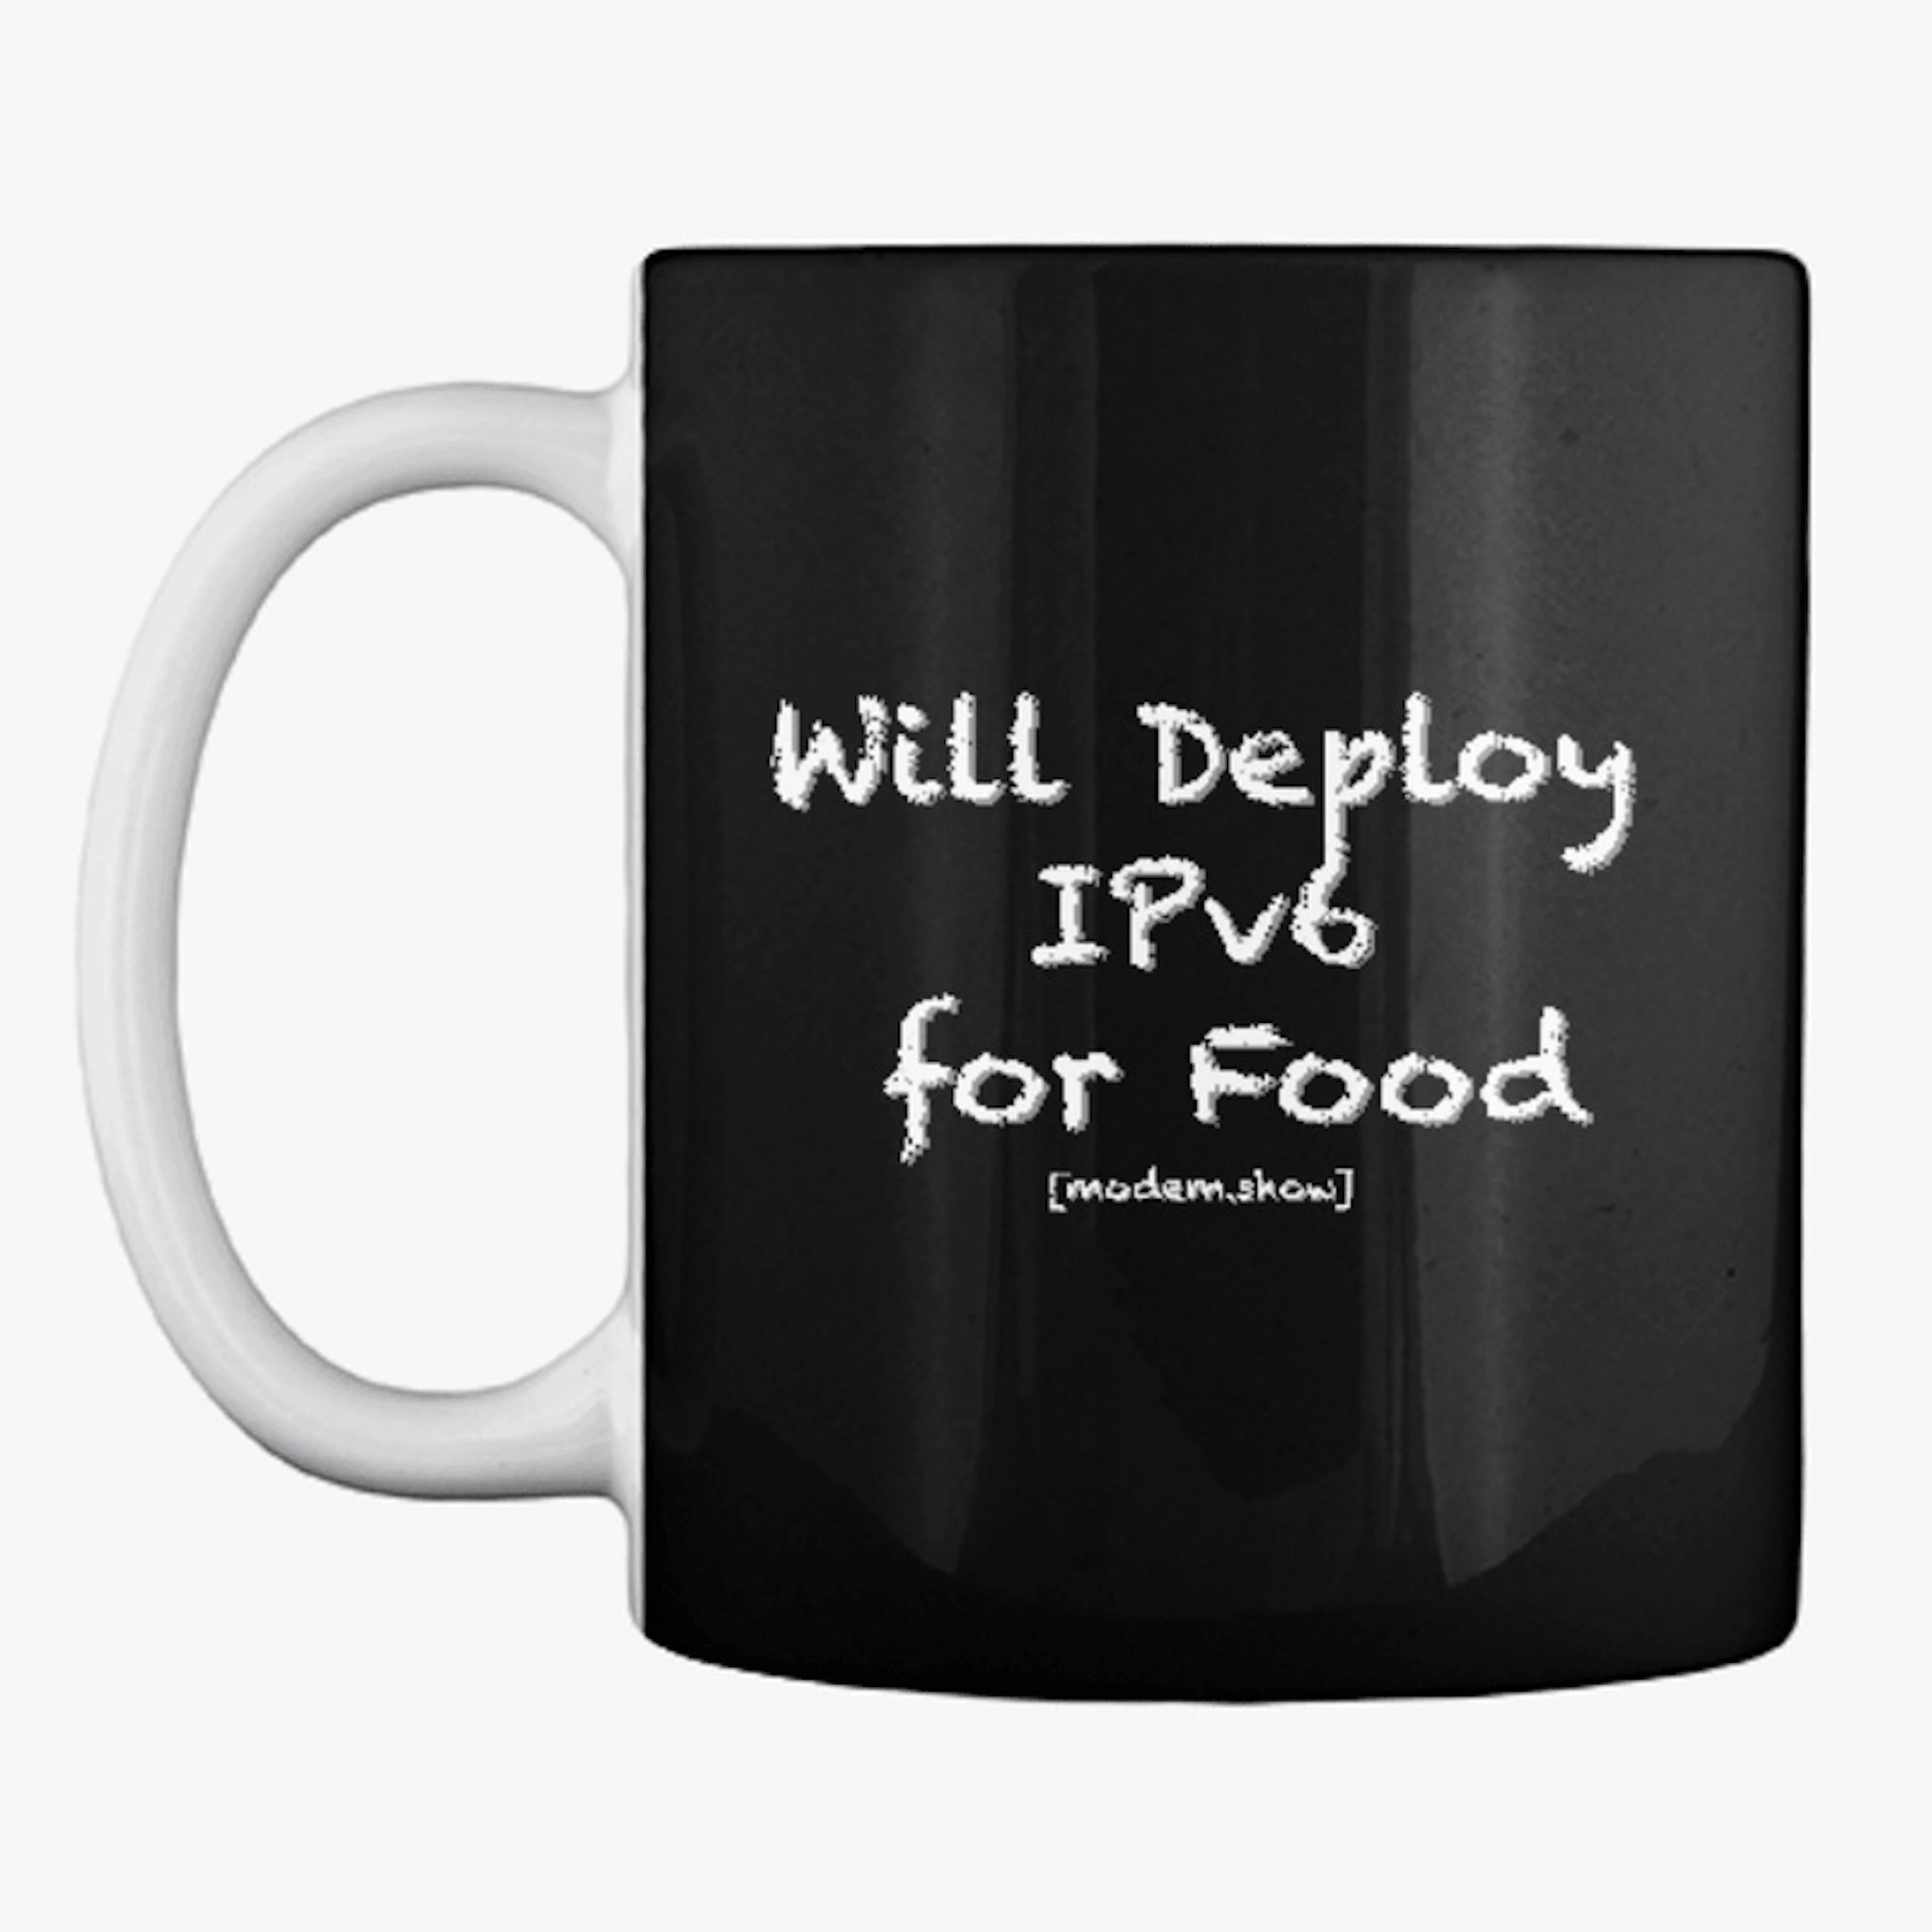 Will deploy IPv6 for food